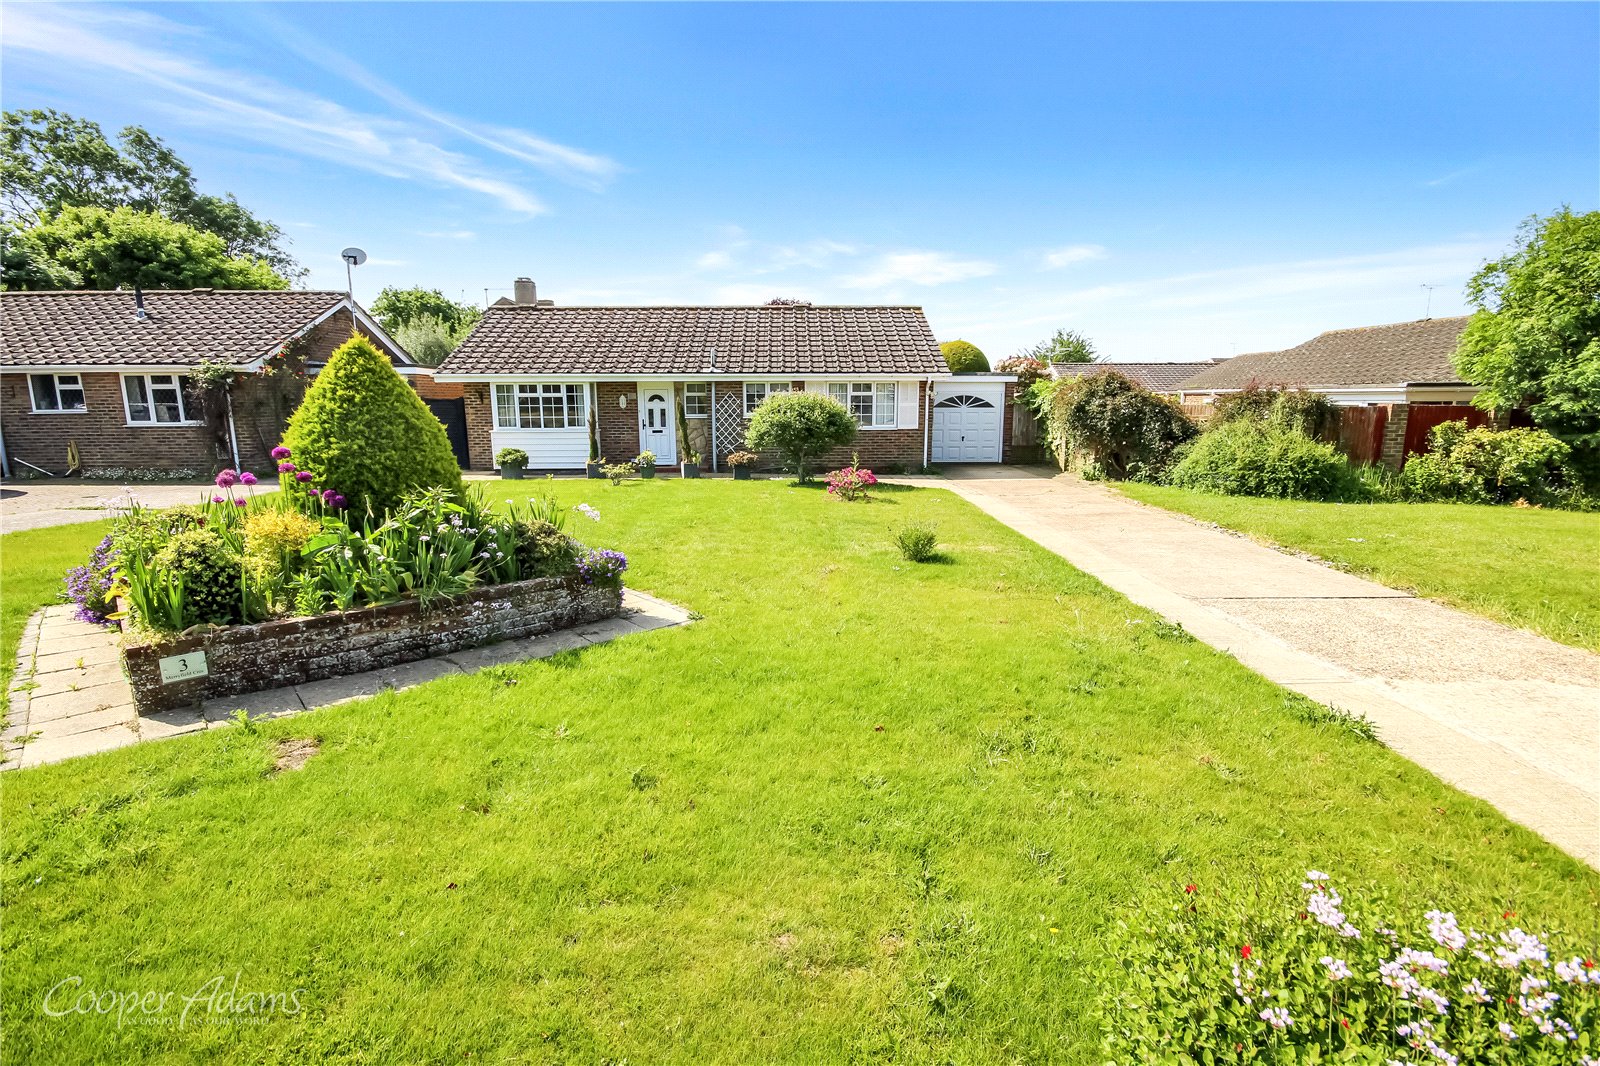 2 bed bungalow for sale in Merryfield Crescent, Angmering  - Property Image 1